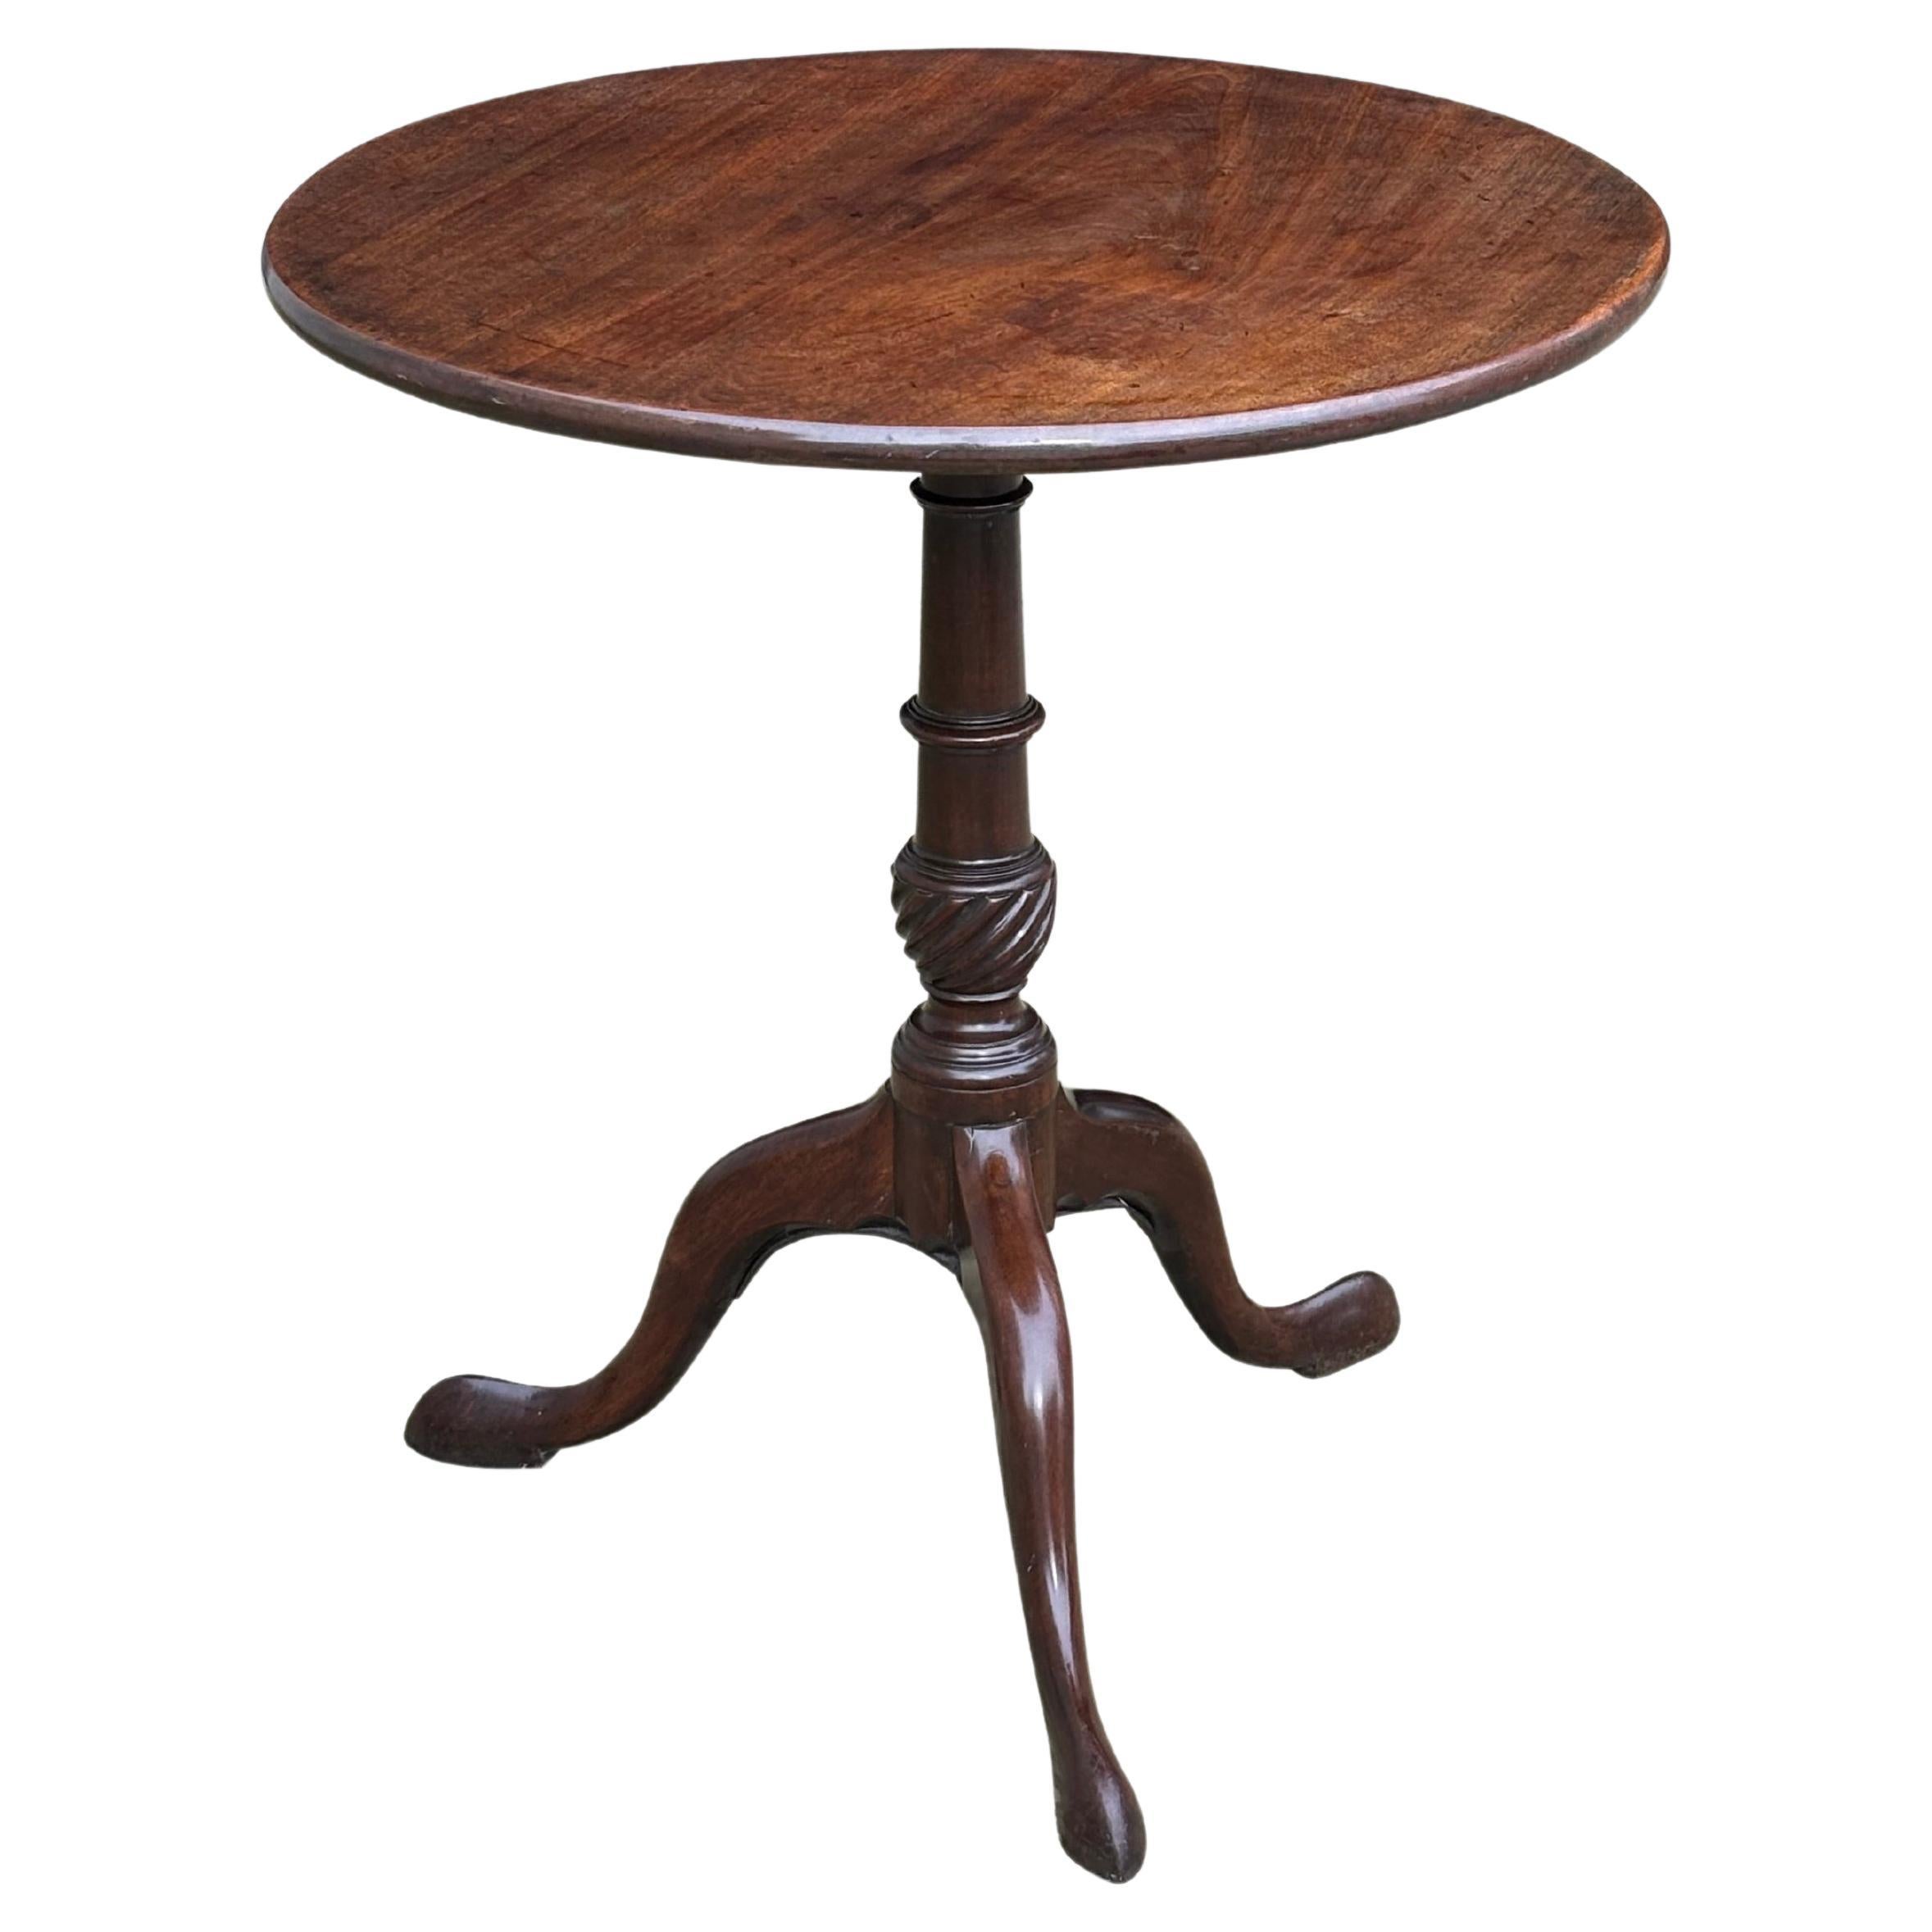 18th Century George III Period Mahogany Tilt-Top Tripod Table For Sale